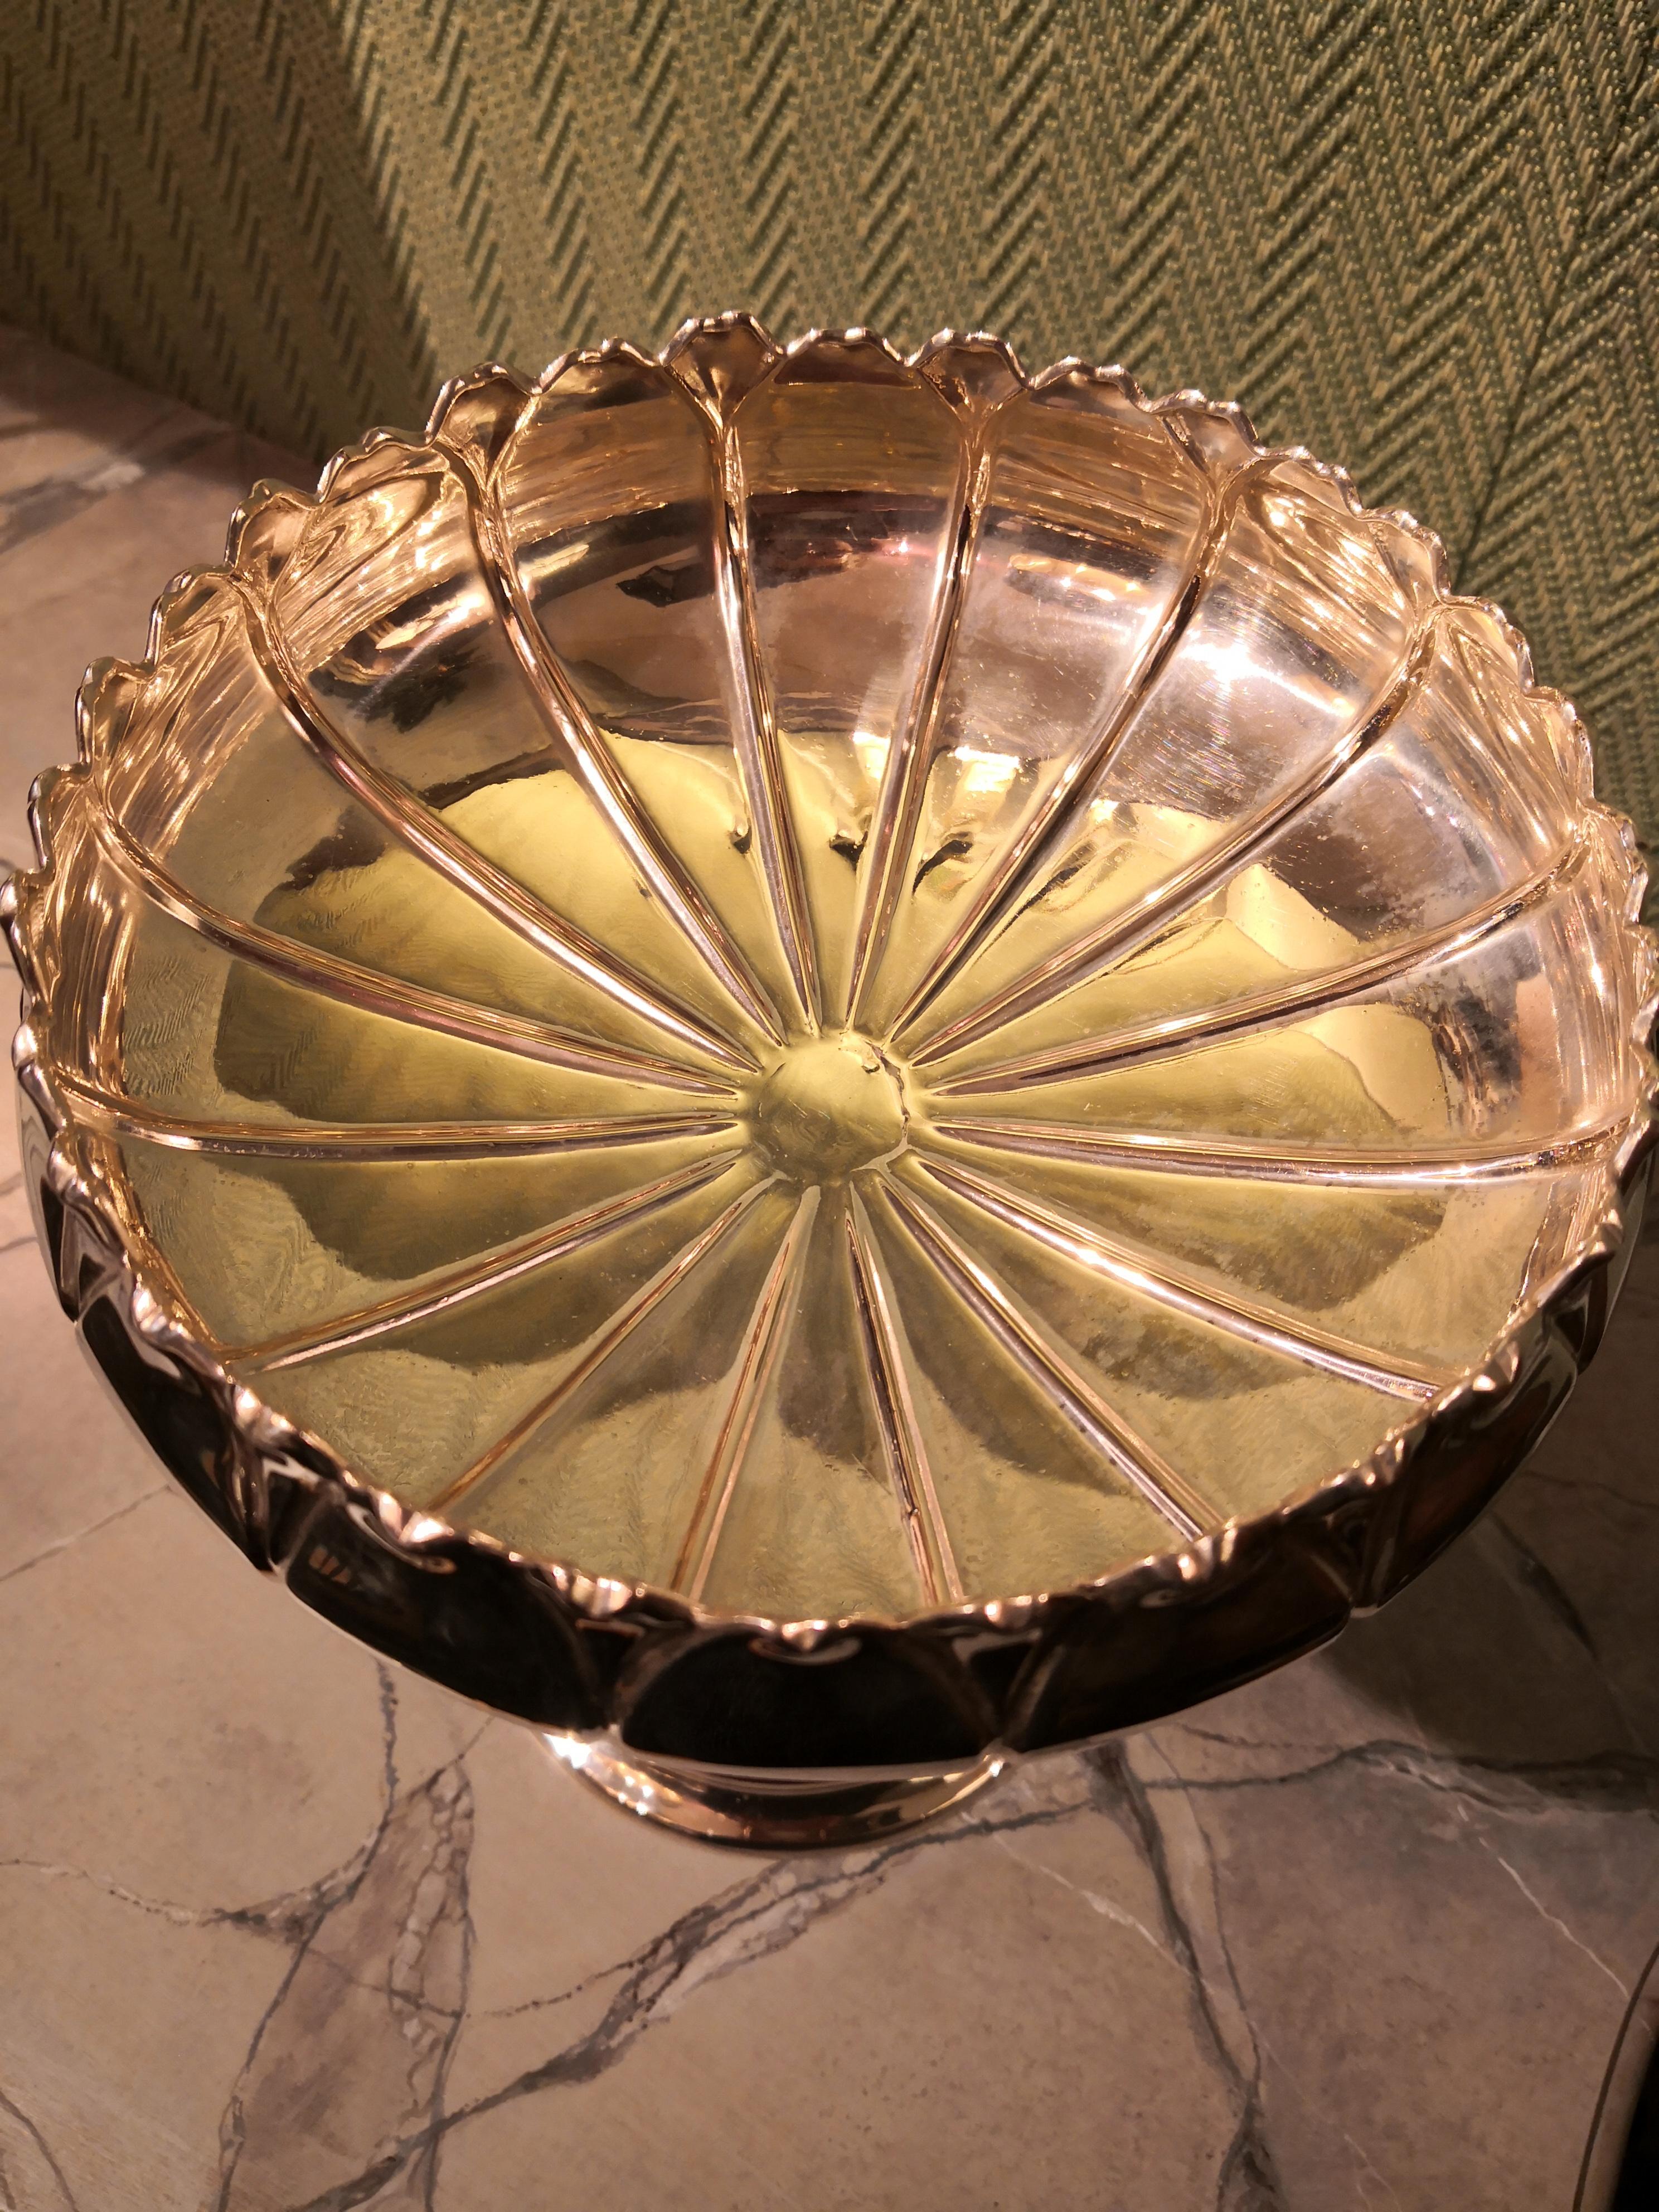 Hugh German Art Nouveau centerpiece bowl in 800 silver. The bowl is shaped as a water lily blossom with the characteristic leaves left and right hand underneath the blossom. Round stand with a naturalistic water lily bud .
Stamped 800 and German